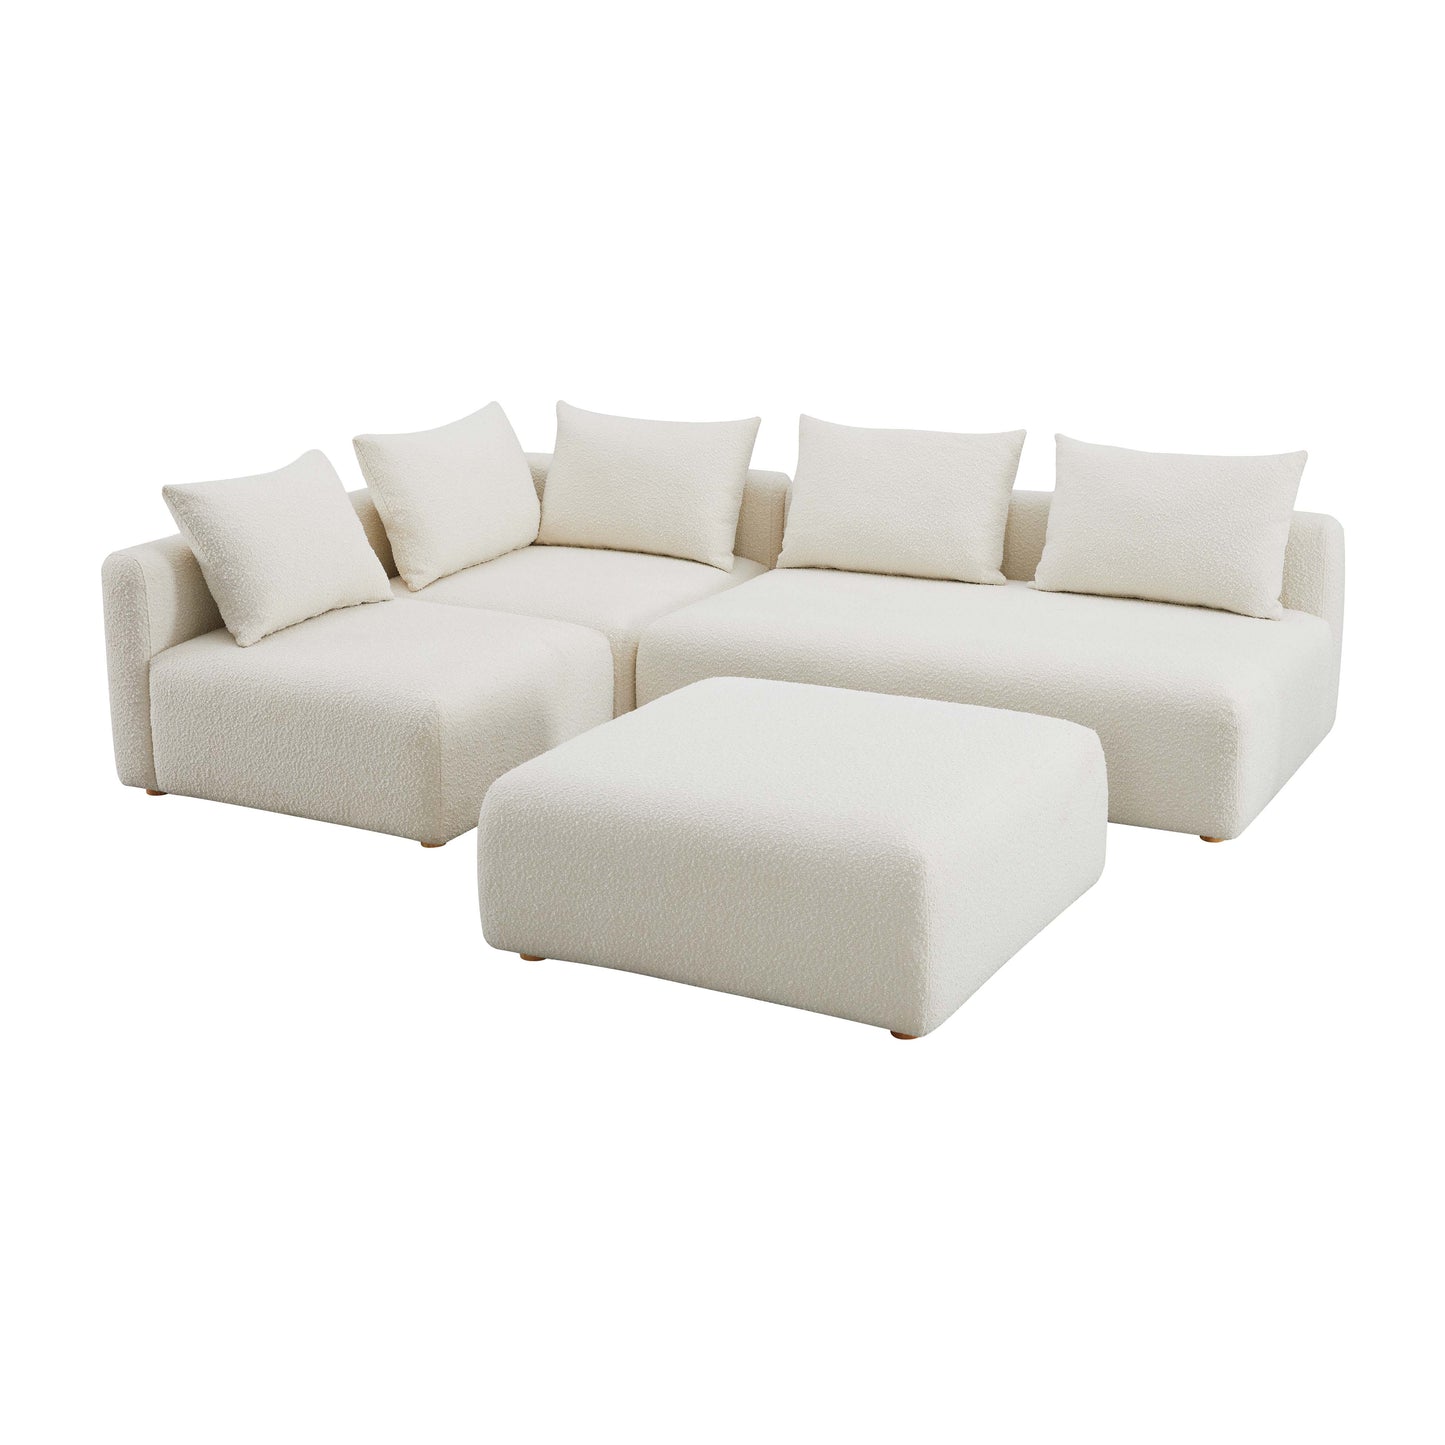 Tov Furniture Hangover Cream Boucle 4-Piece Modular Chaise Sectional